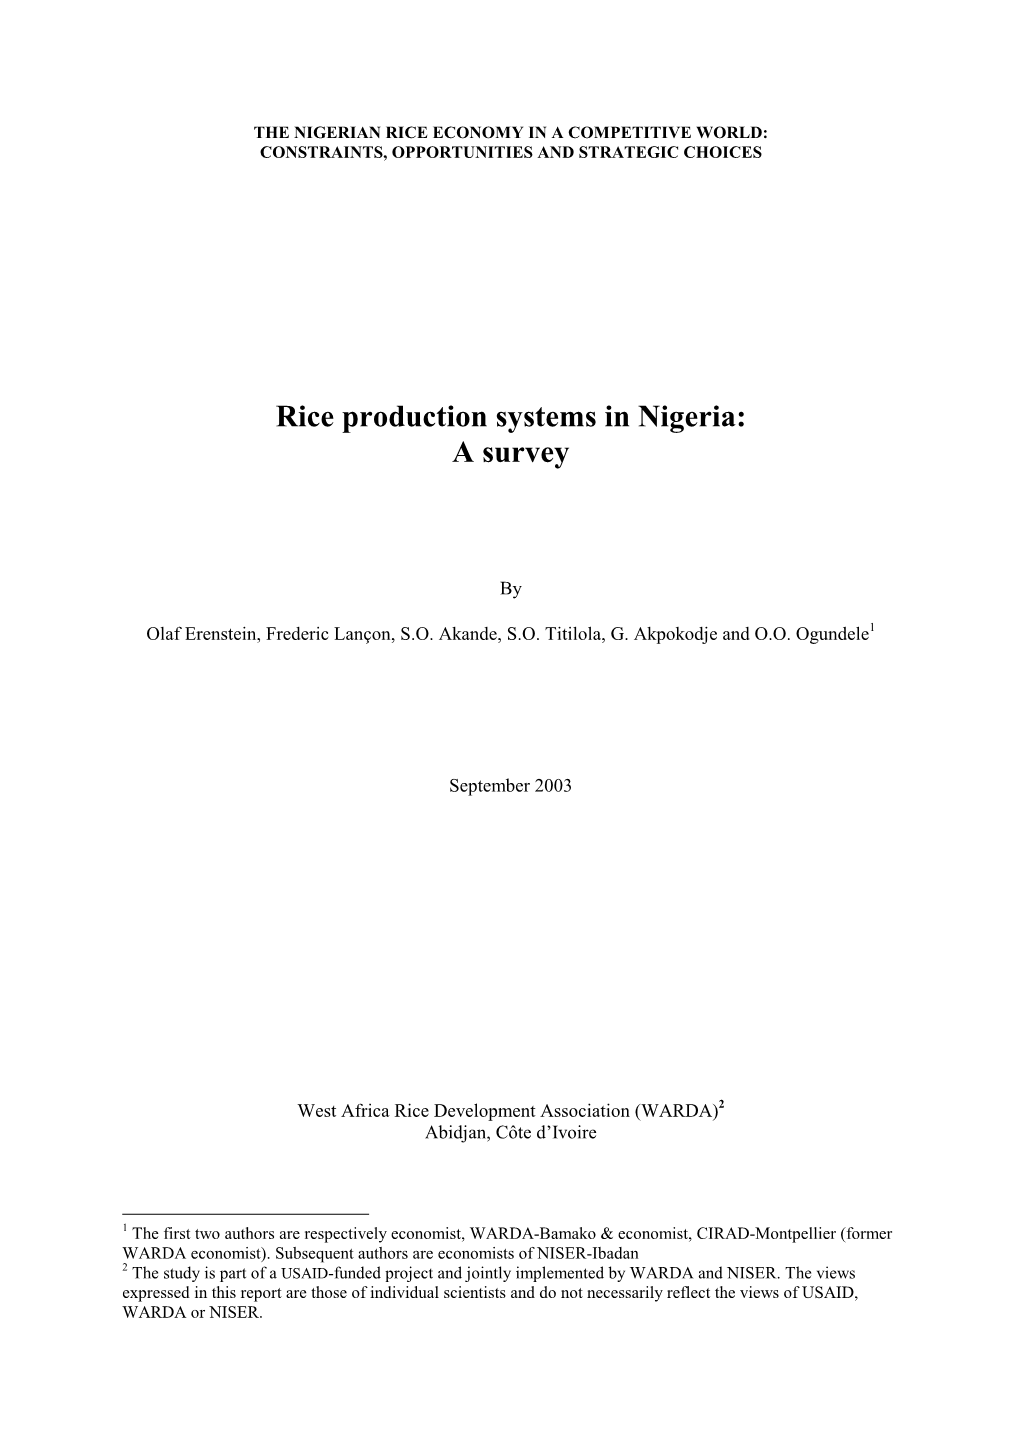 Rice Production Systems in Nigeria: a Survey